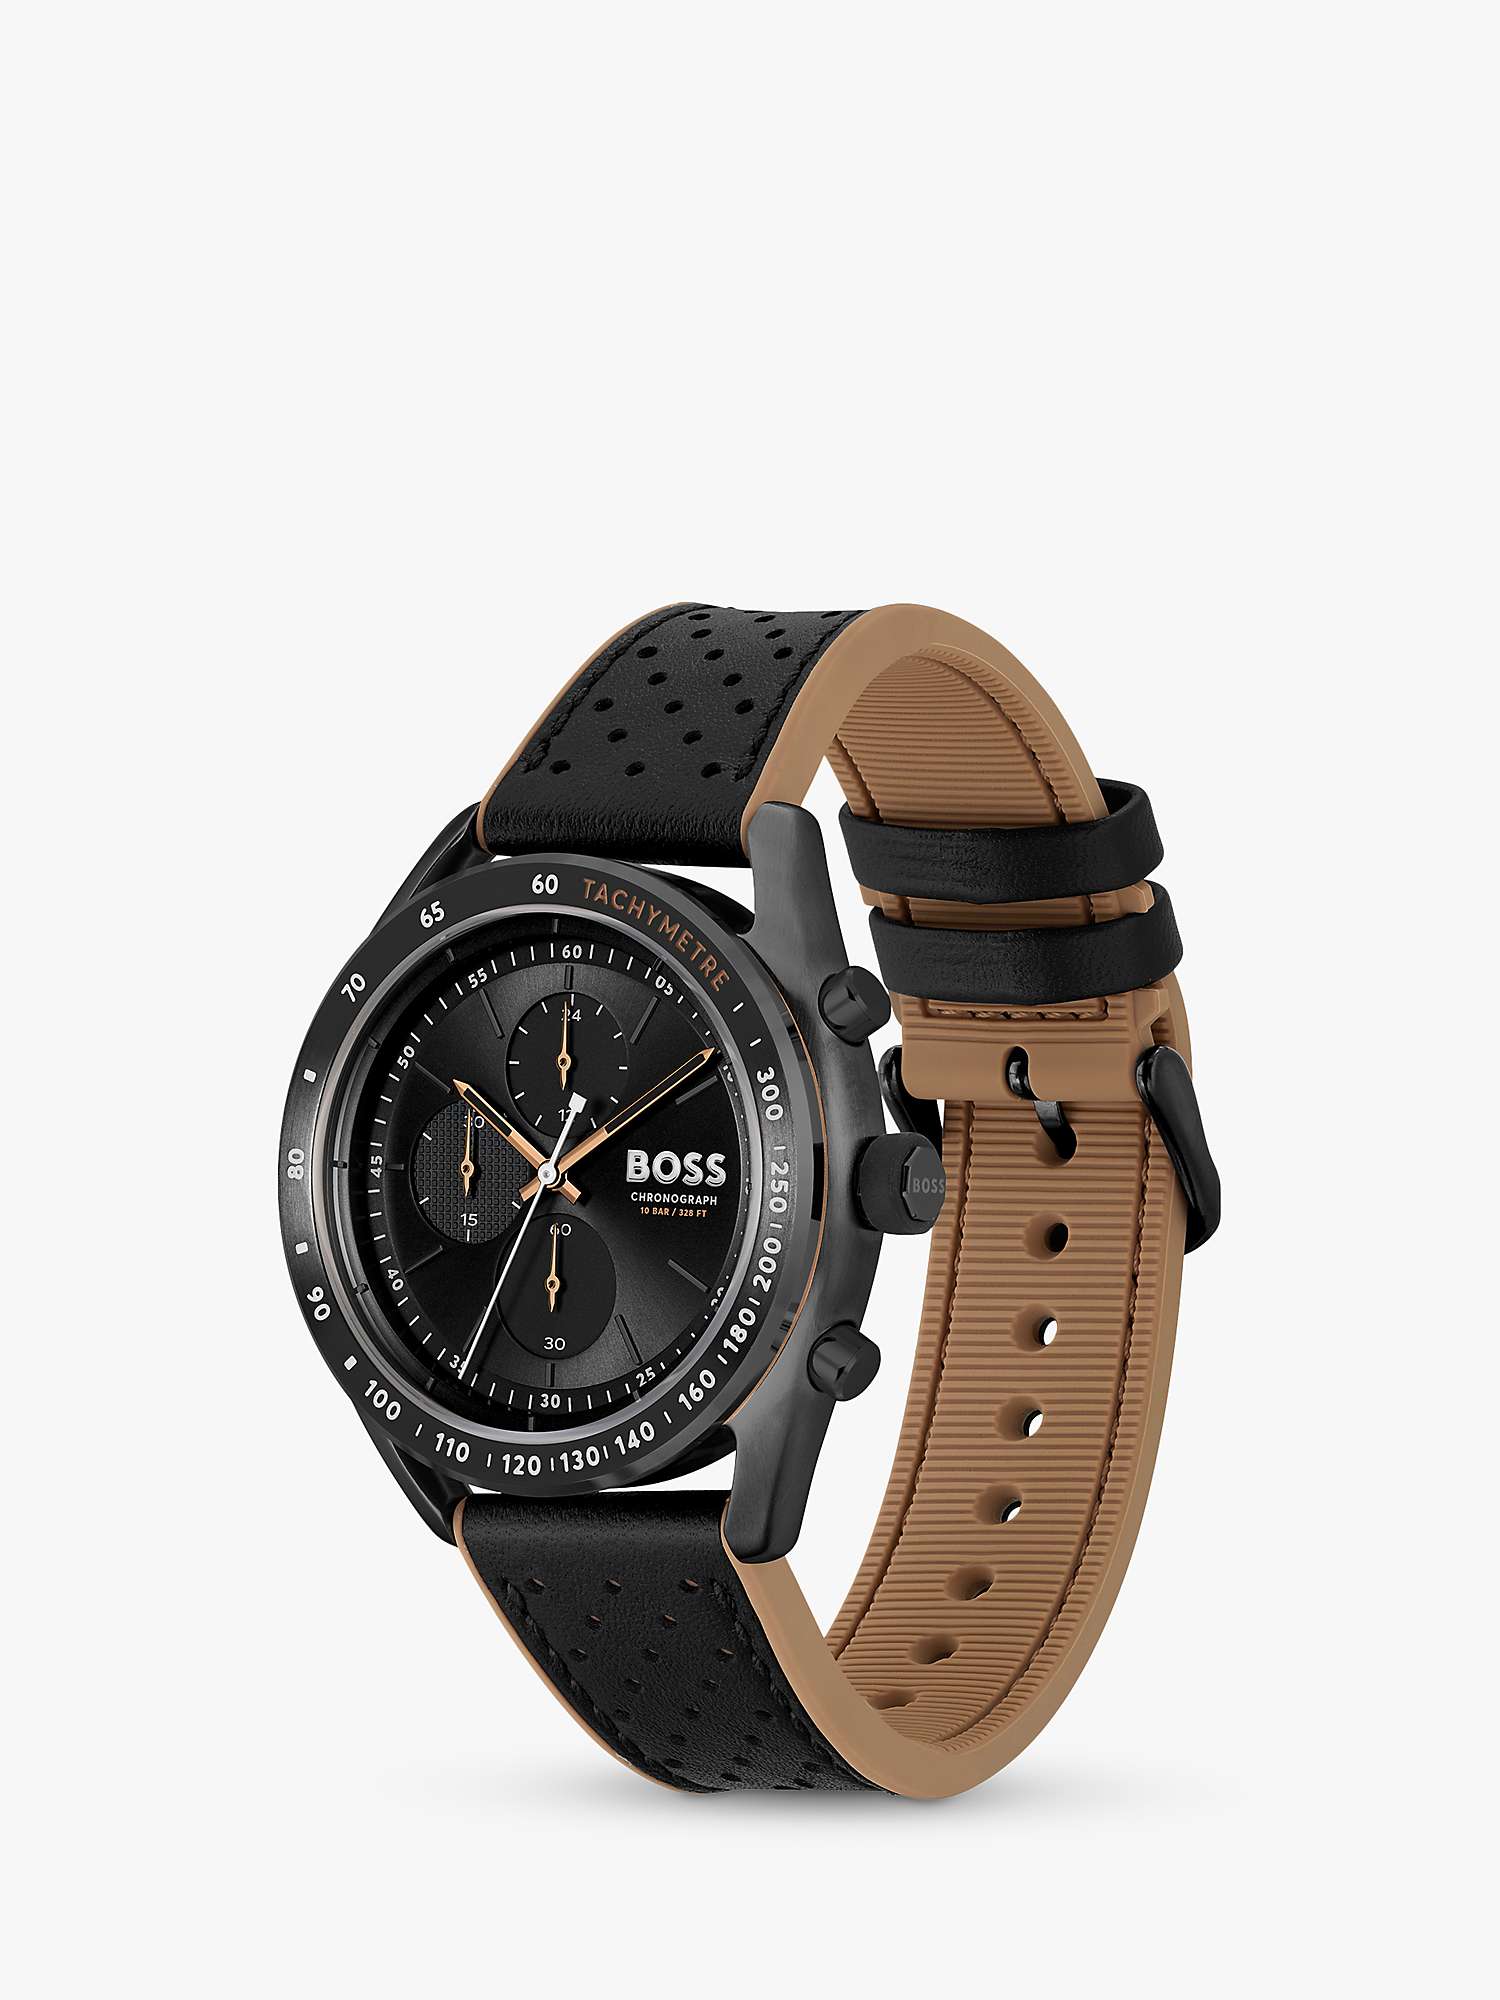 Buy BOSS 1514022 Men's Centre Court Chronograph Leather Strap Watch, Black/Brown Online at johnlewis.com